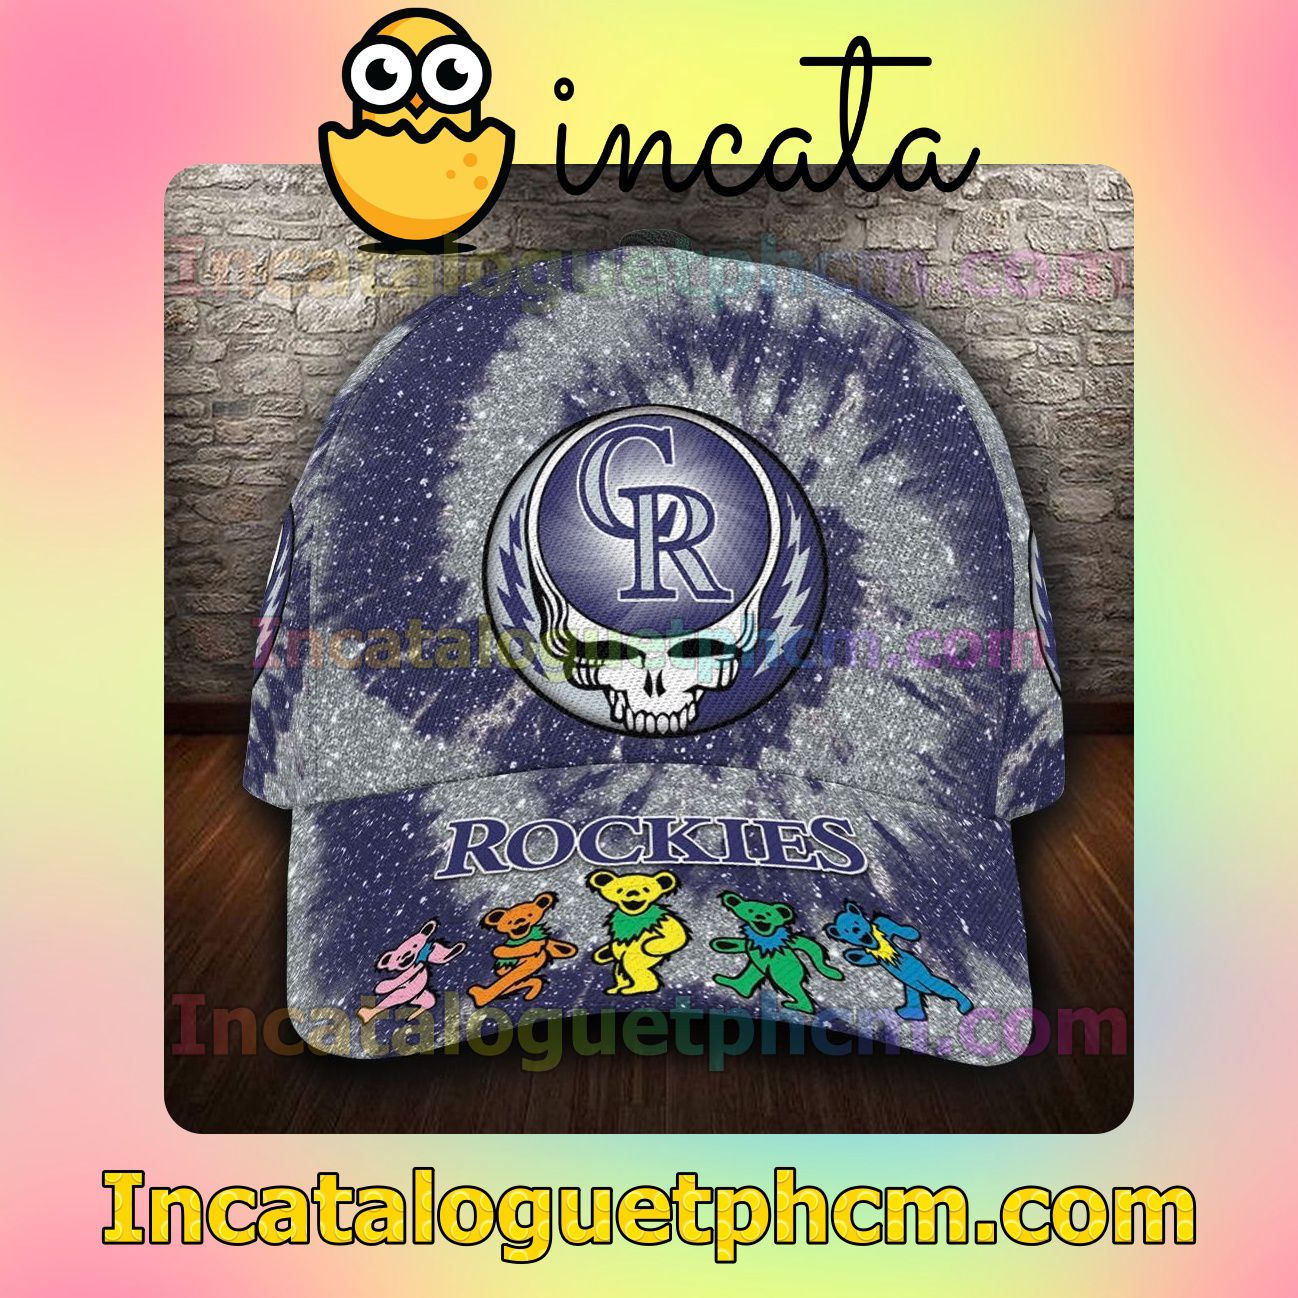 Top Rated Colorado Rockies & Grateful Dead Band MLB Customized Hat Caps